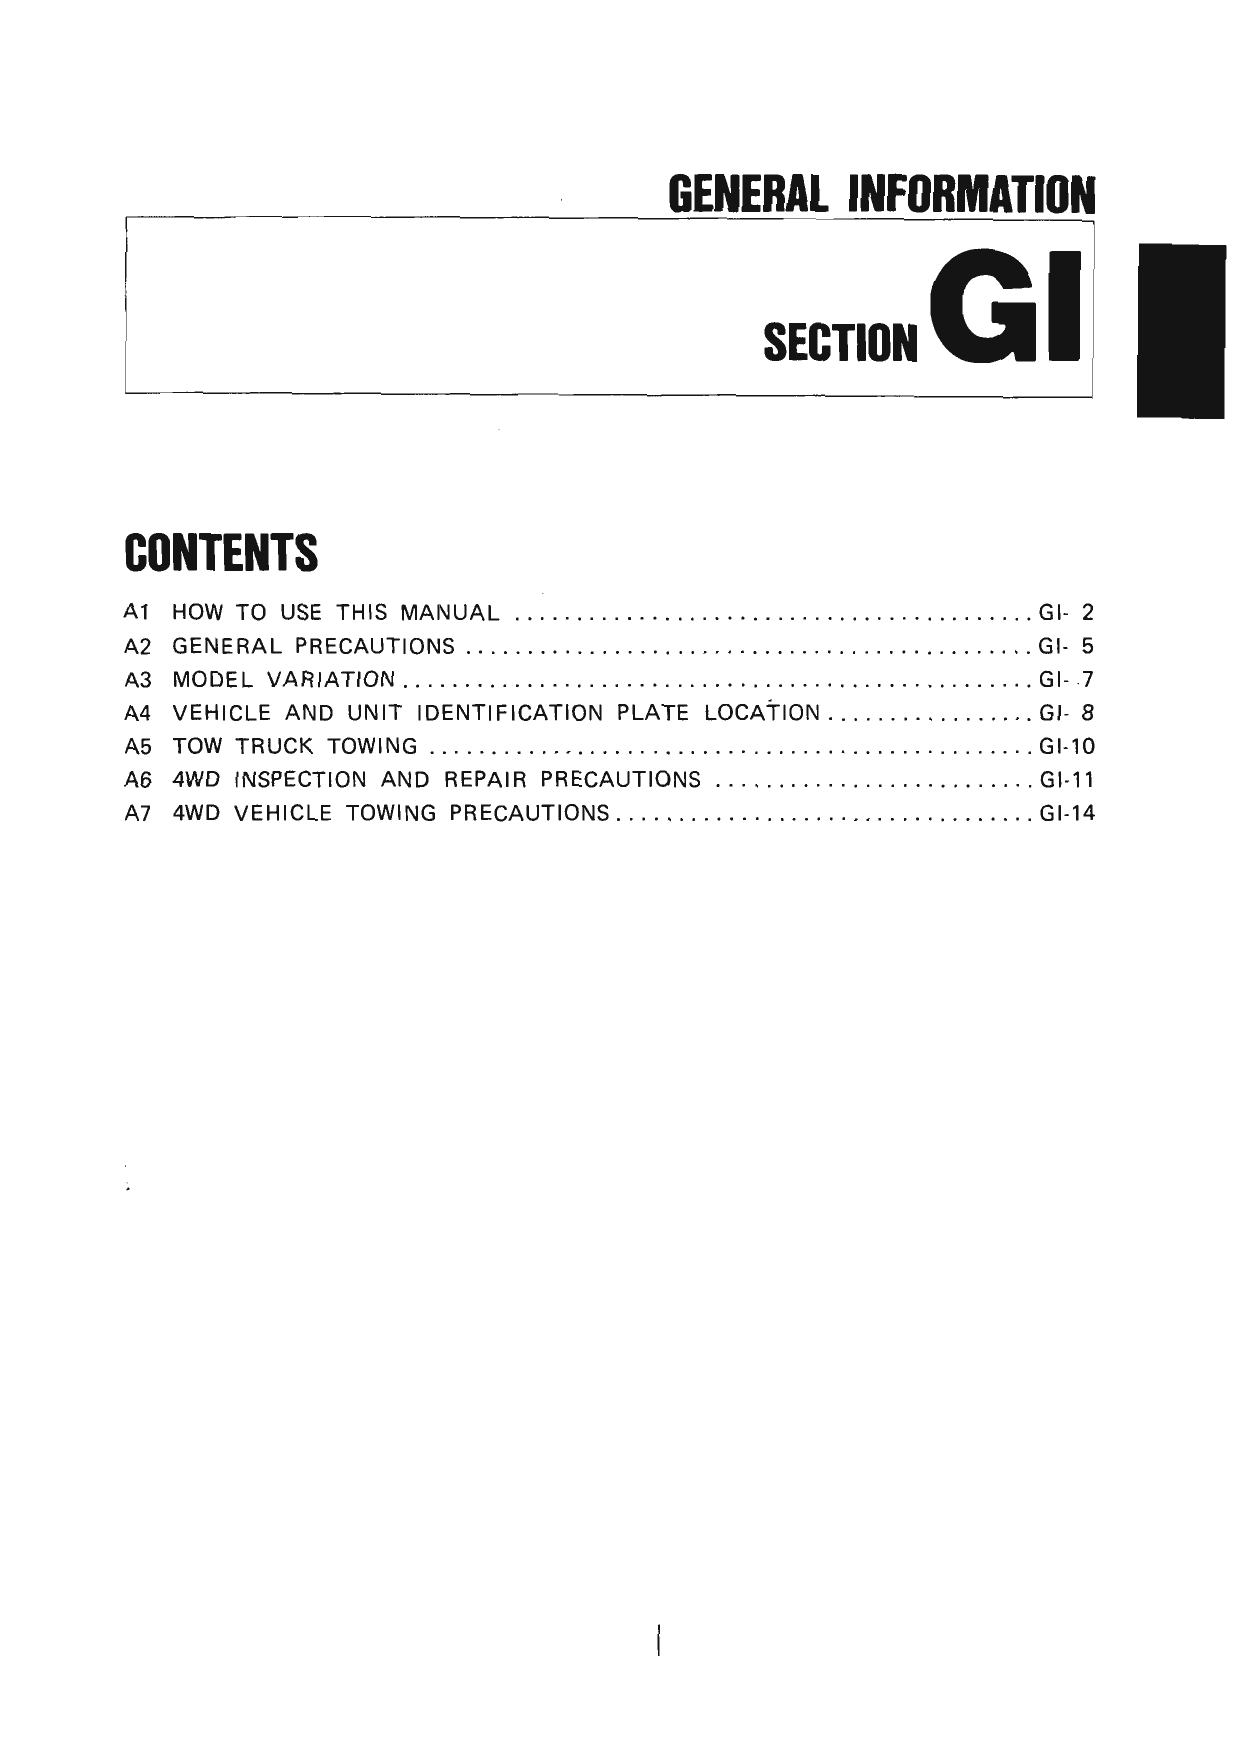 Nissan Skyline R32 GTR service and shop manual Preview image 4